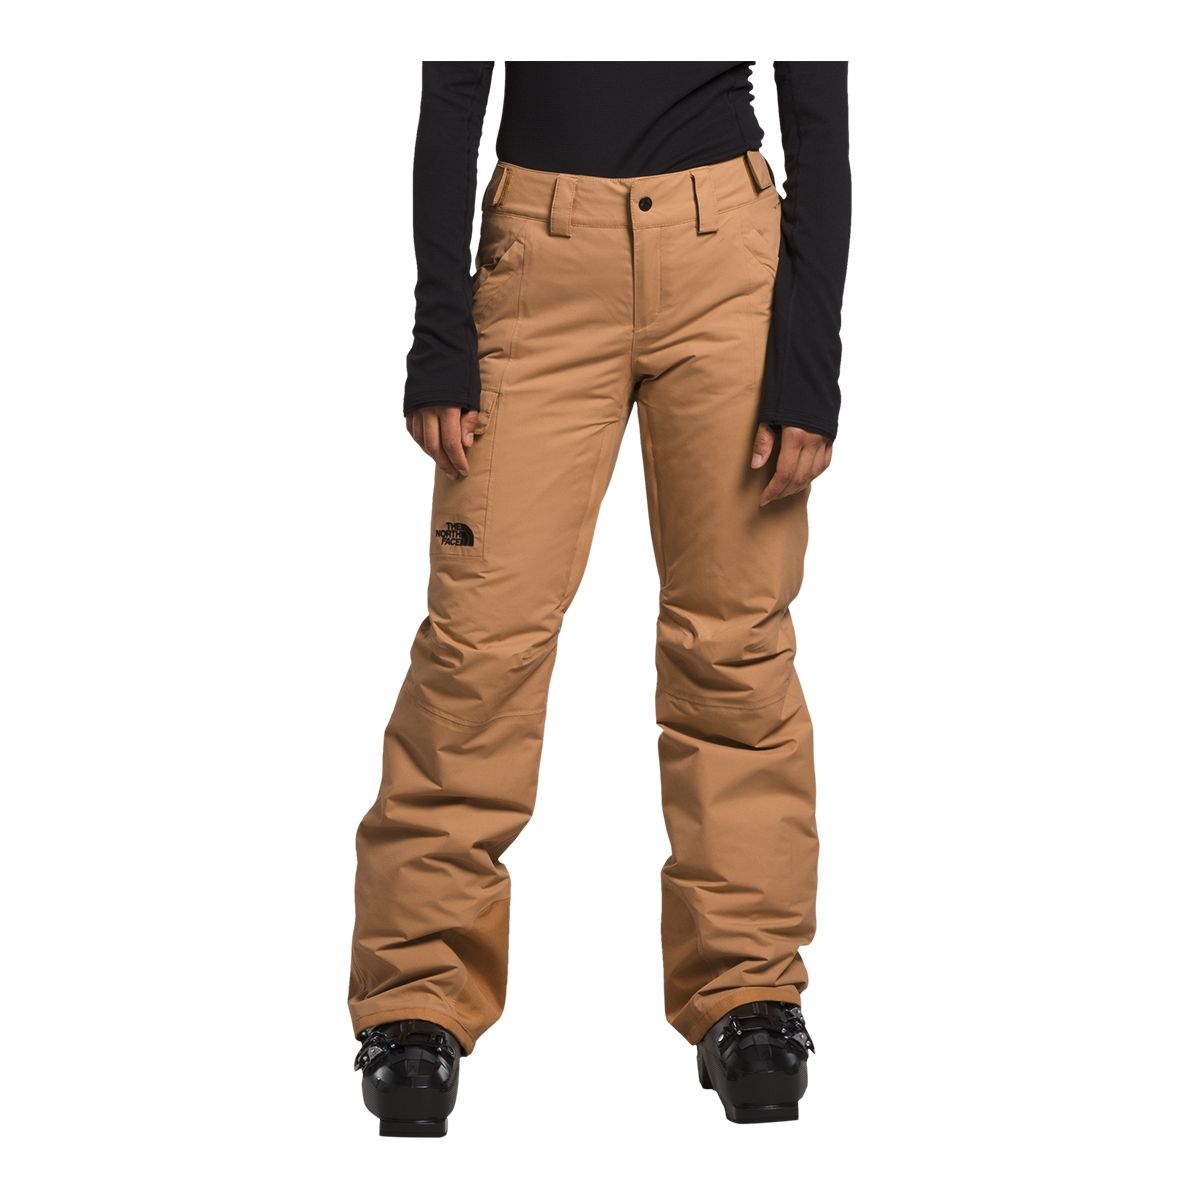 The North Face Freedom Insulated Pant - Ski trousers Girls